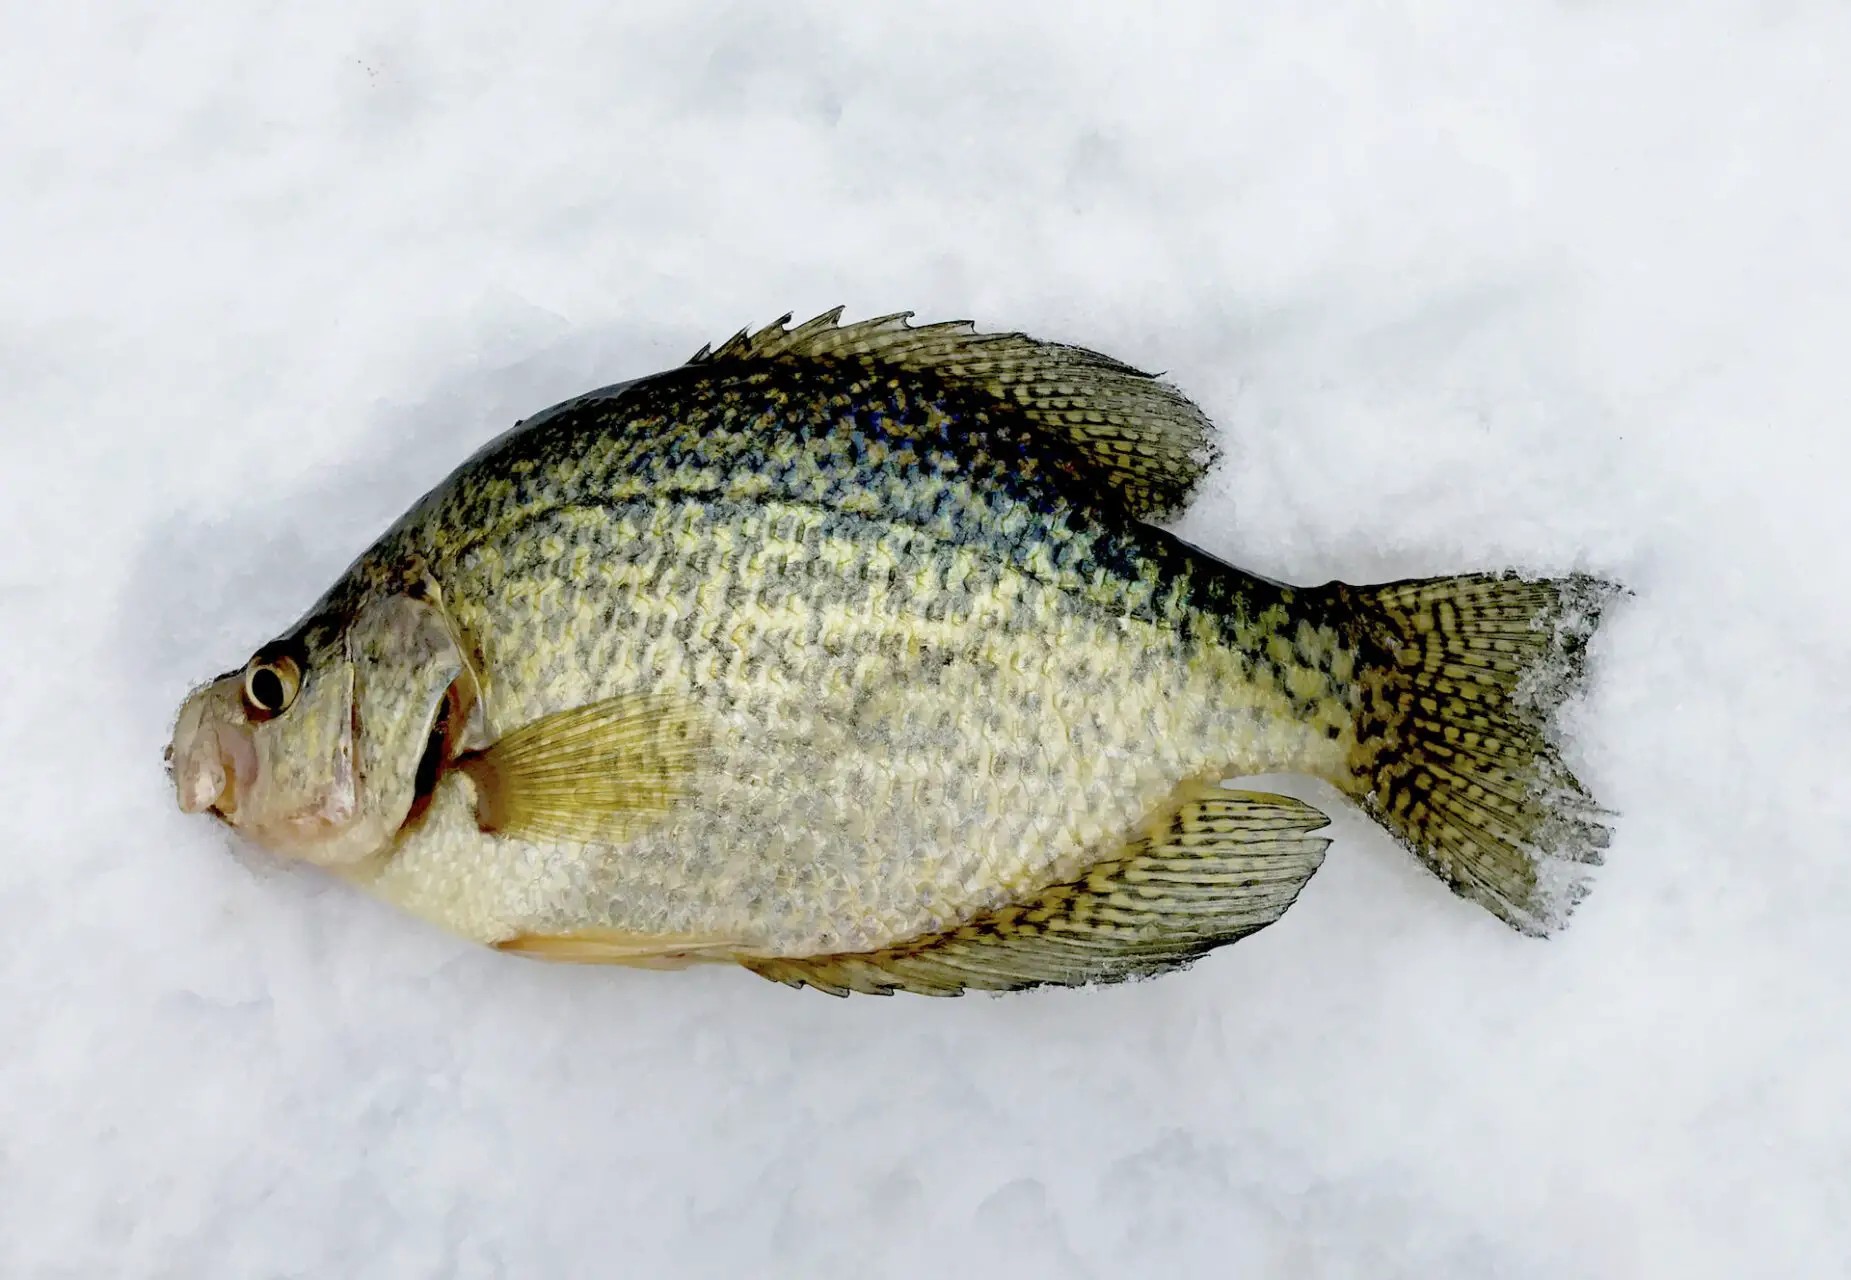 Are Crappie Good to Eat? A Crappie Caught Ice Fishing